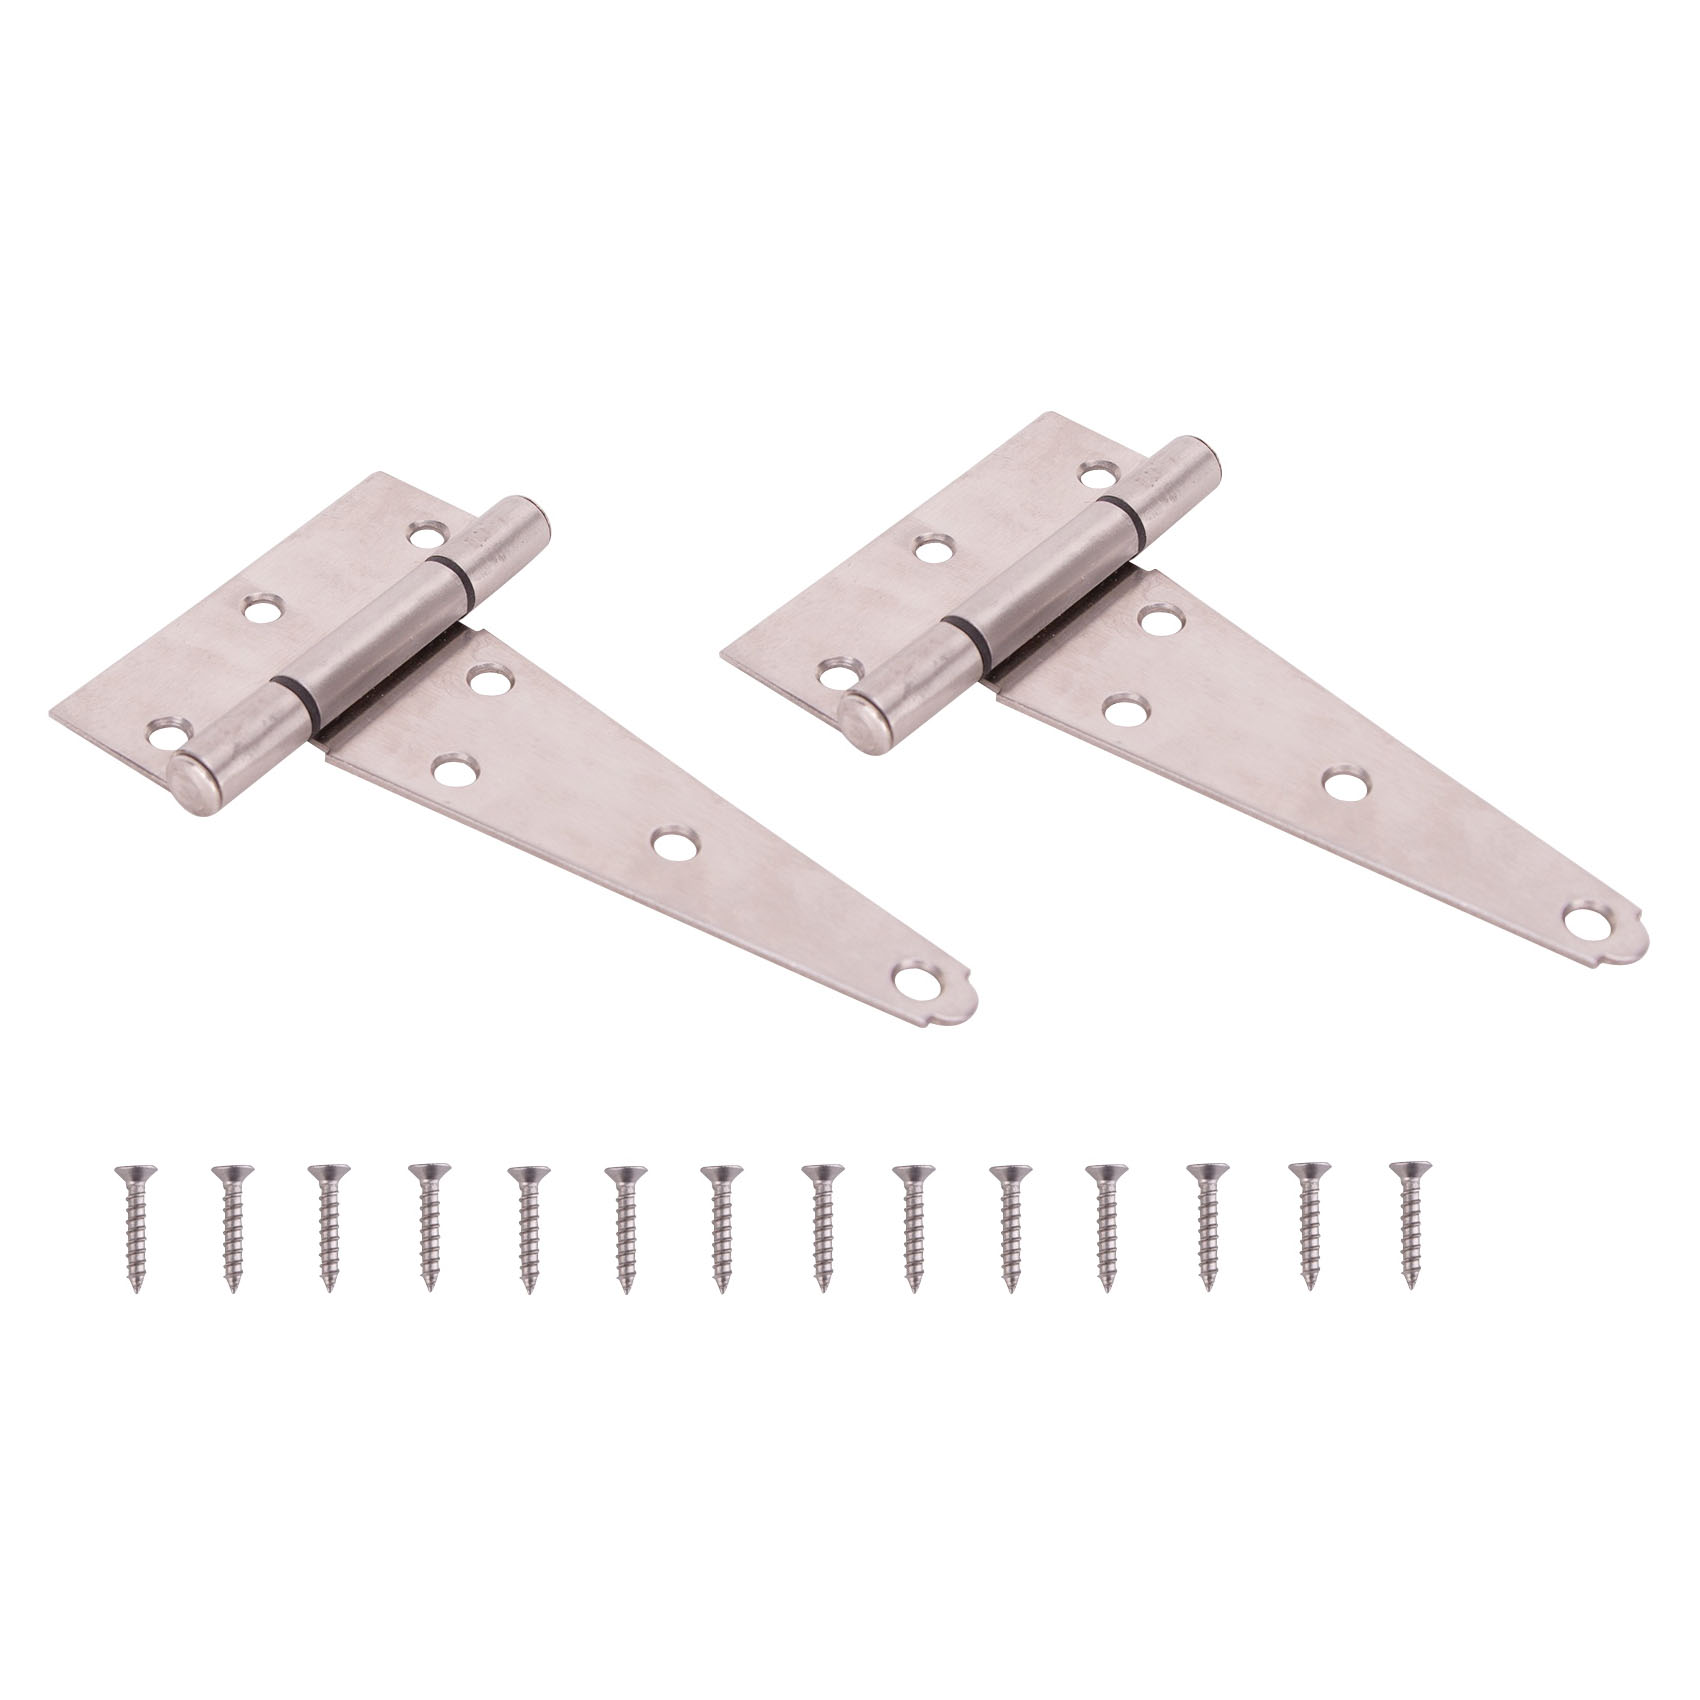 HTH-S05-C1PS T-Hinge, Stainless Steel, Brushed Stainless Steel, Fixed Pin, 180 deg Range of Motion, 70 (Pc) lb